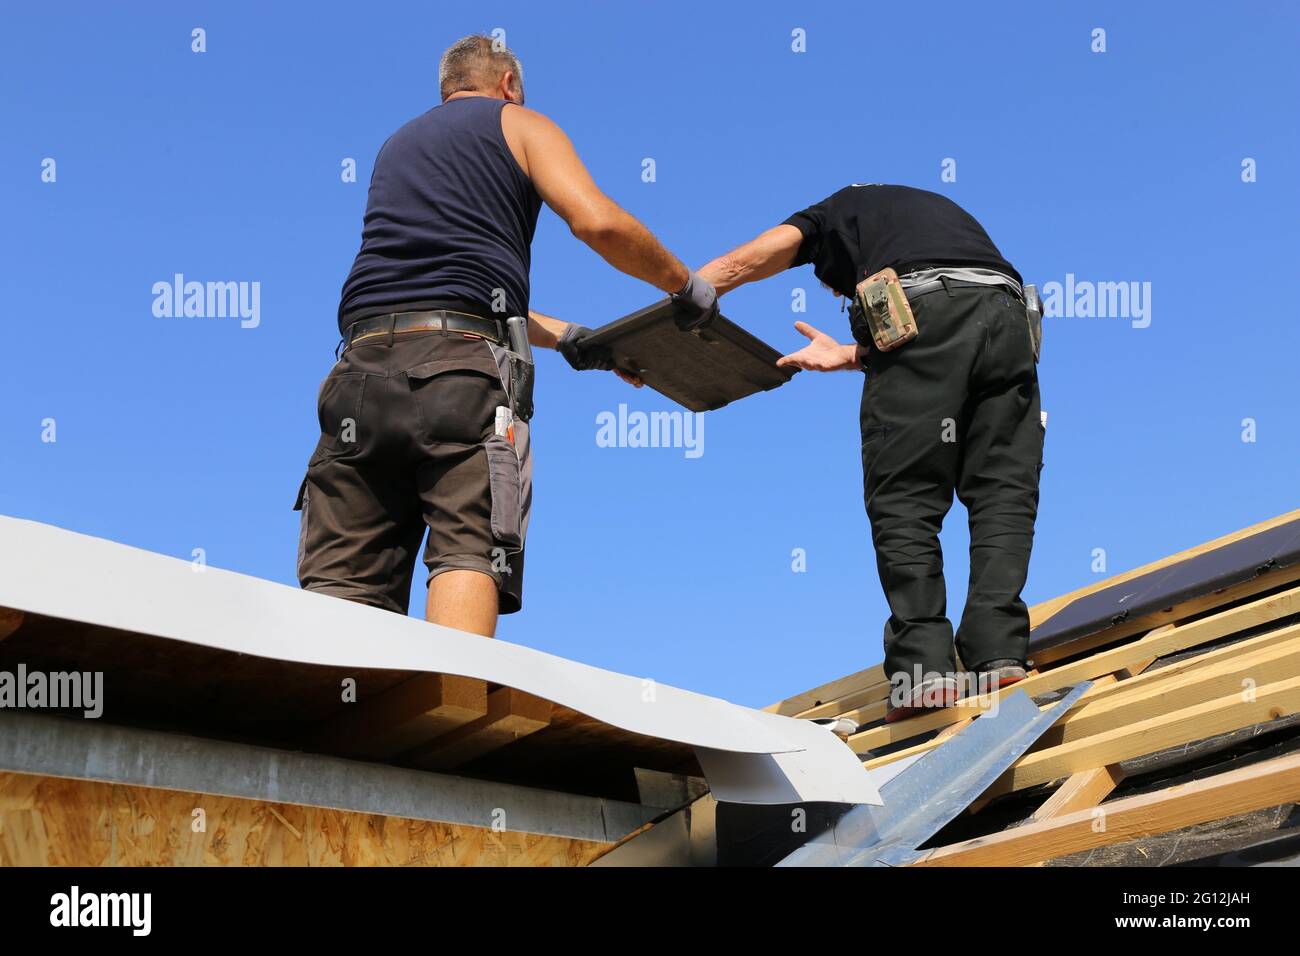 Roofing work, new covering of a tiled roof. Stock Photo